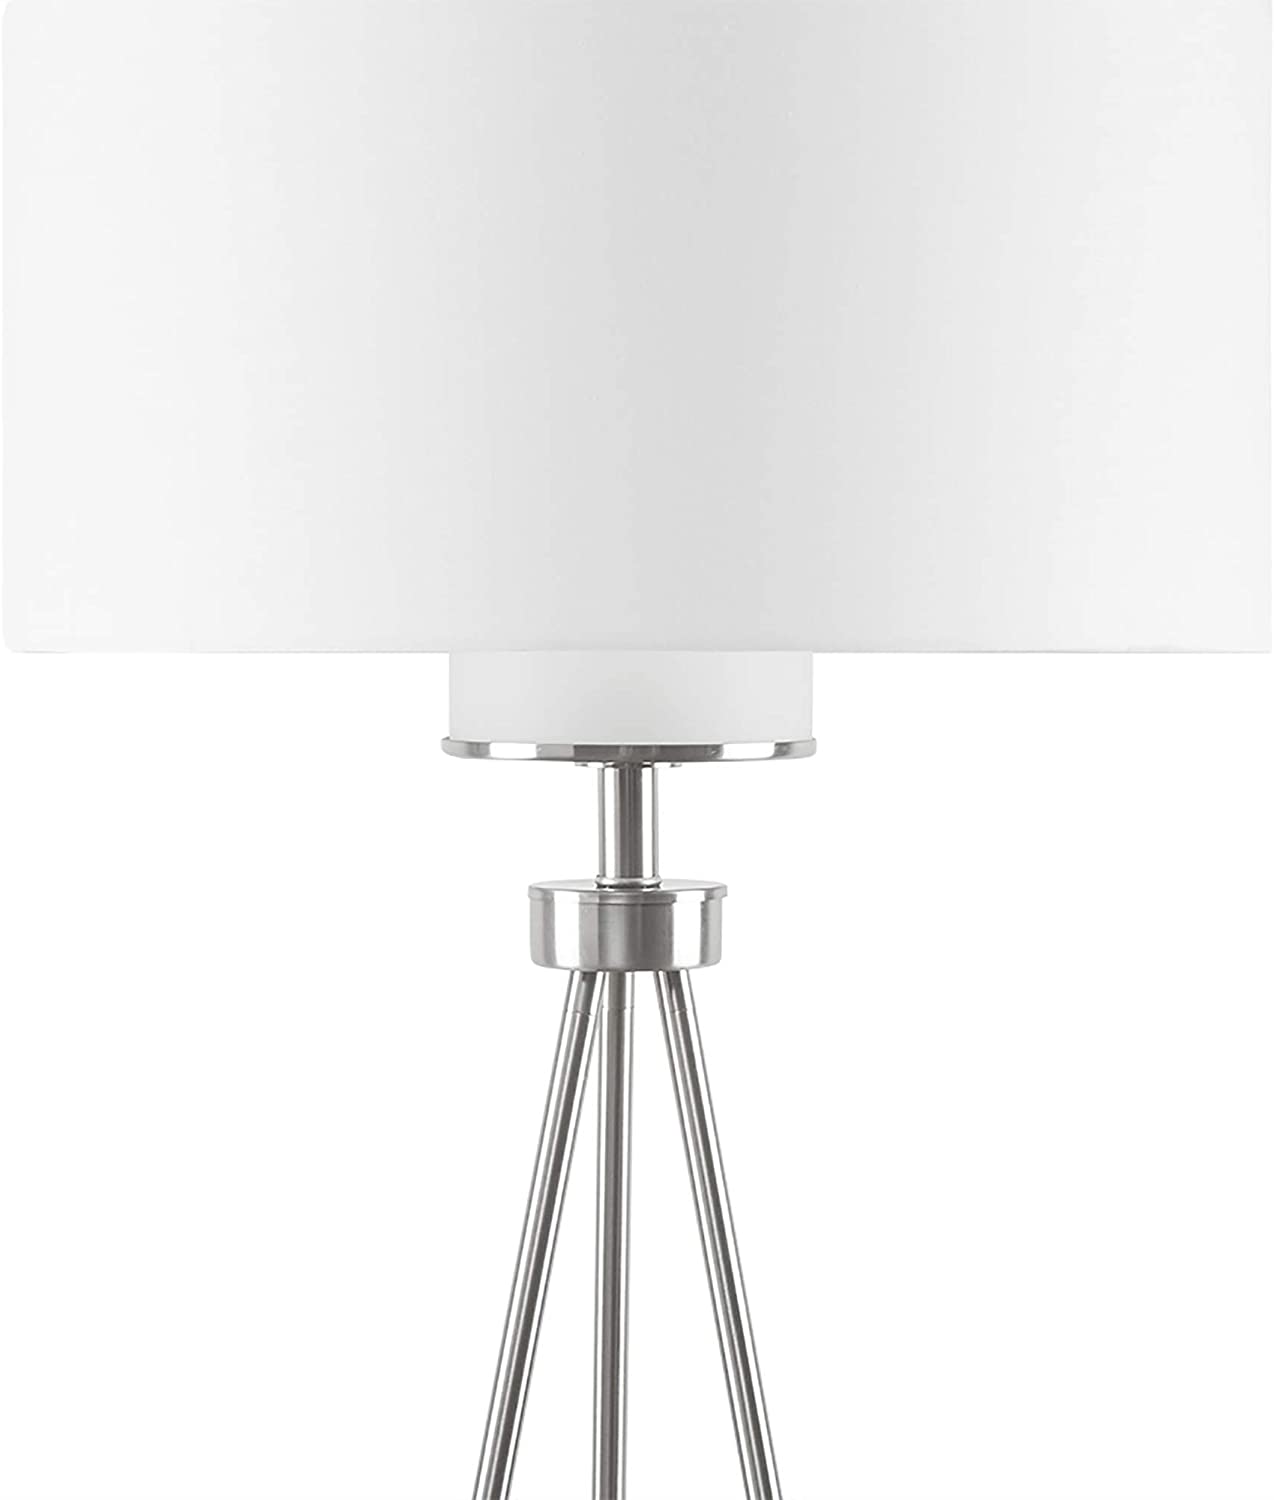 INK+IVY II154-0091 Pacific Floor Lamp-Modern Luxe Accent Furniture D√É∆í√Ç¬©cor Lighting for Living Room Metal Post Silver Tripod Uplight, Grey Round Shades, 64.5&#34; Tall